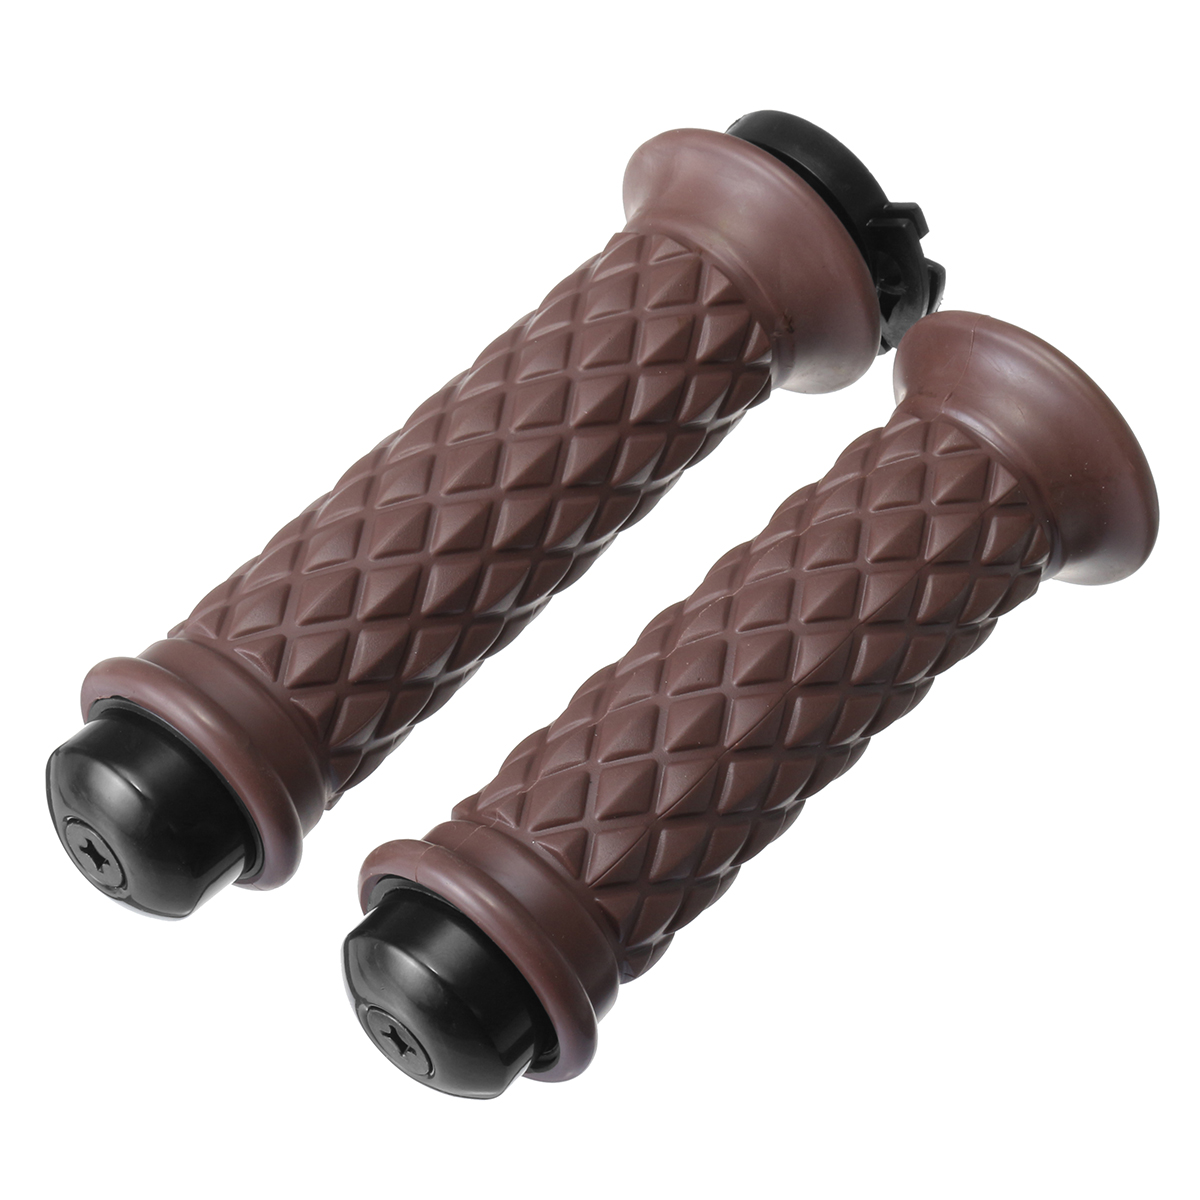 7/8Inch 22Mm Motorcycle Rubber Handlebar Hand Grip for Cafe Racer Bobber Clubman